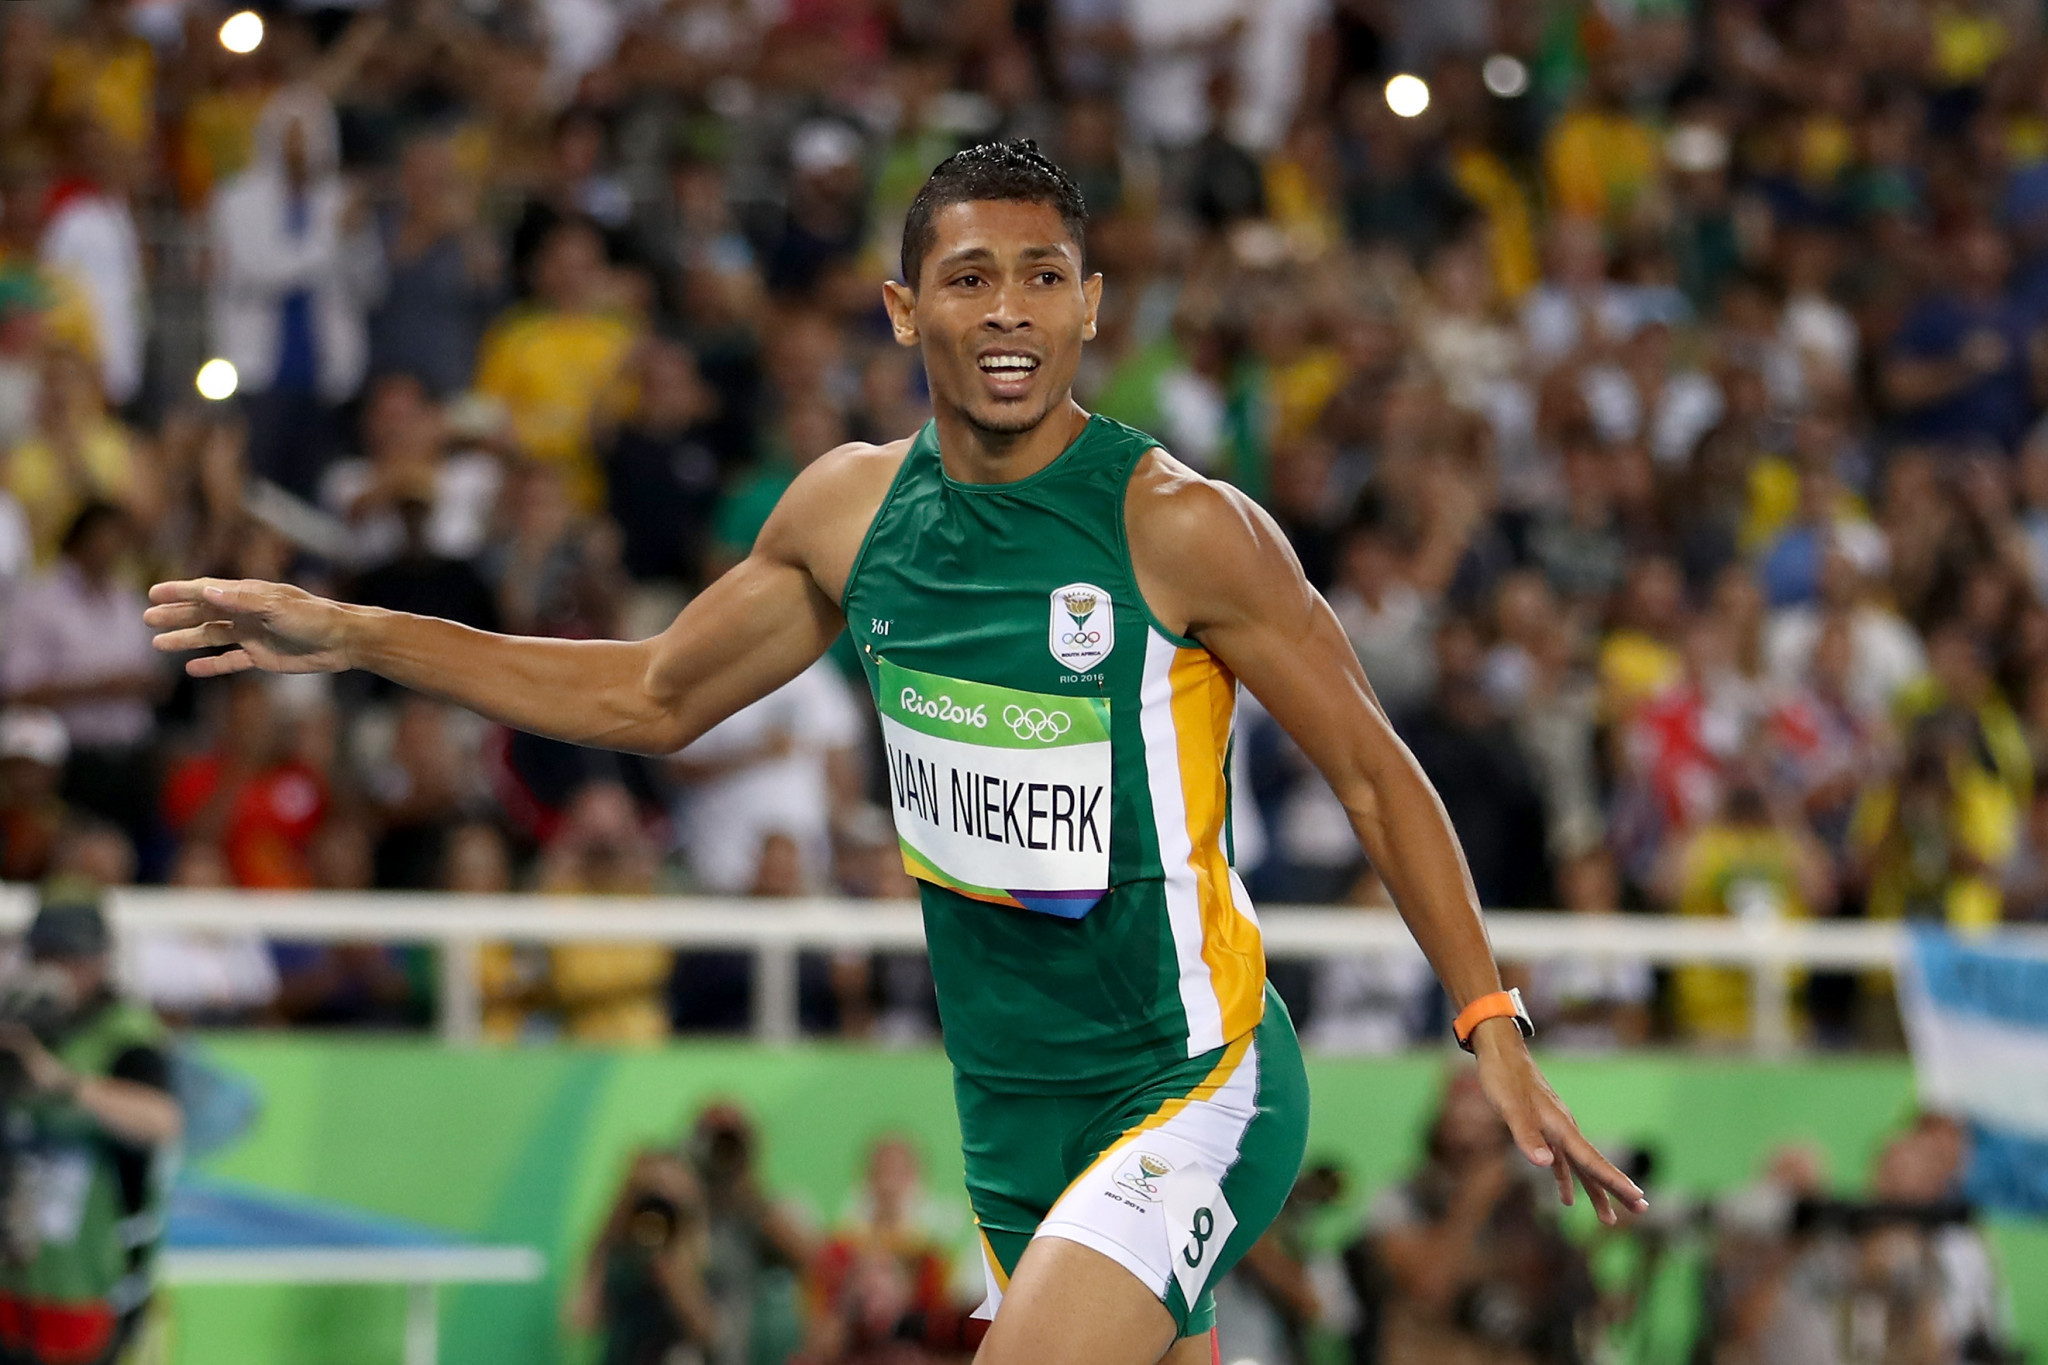 Wayde Van Niekerk was one of South Africa's two Olympic gold medallists at Rio 2016, when he broke the world record in the 400m and is hoping to return from injury in time for Tokyo 2020 ©Getty Images